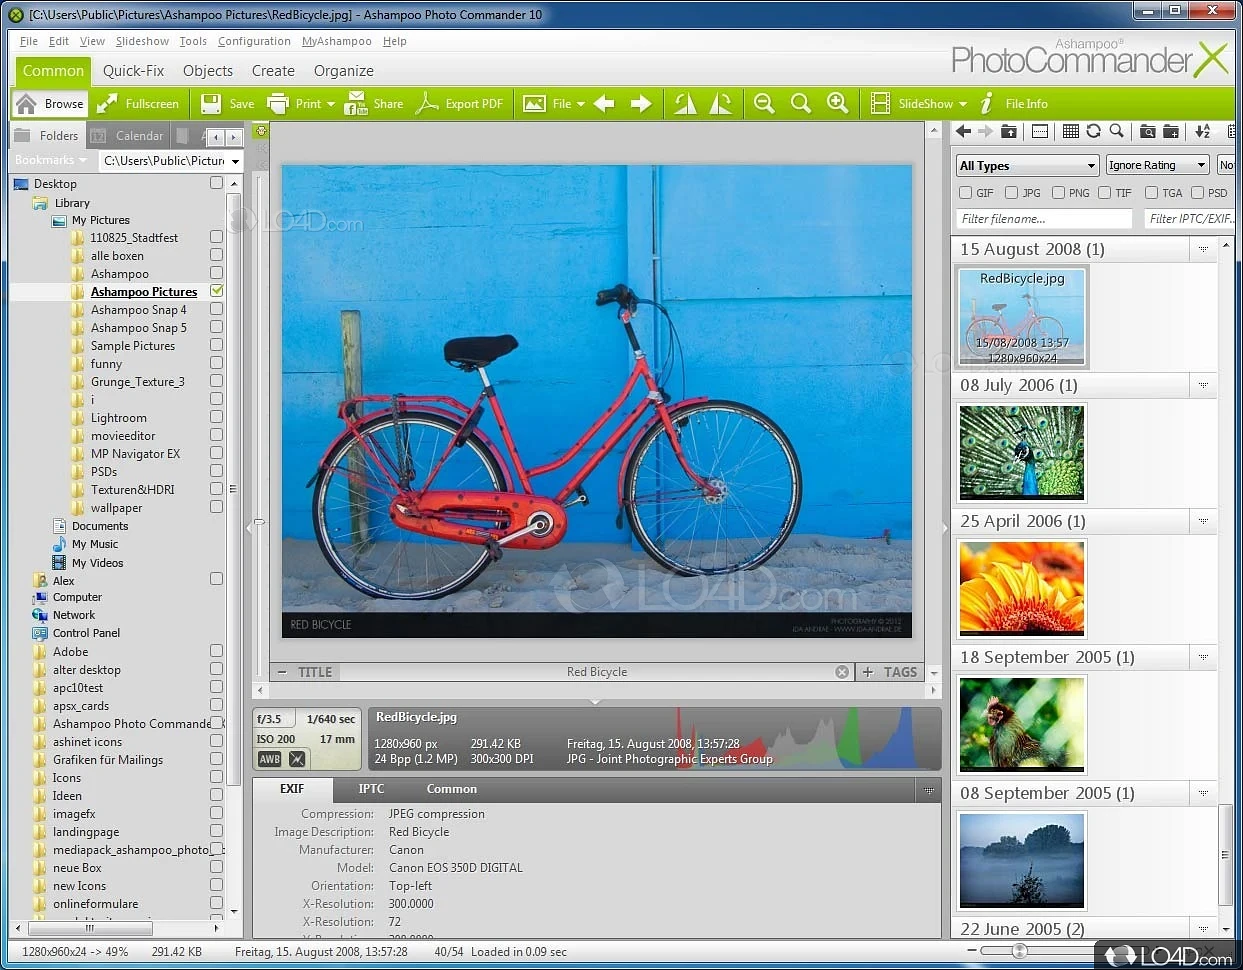 Support for multimedia tracks and view their metadata - Screenshot of Ashampoo Photo Commander